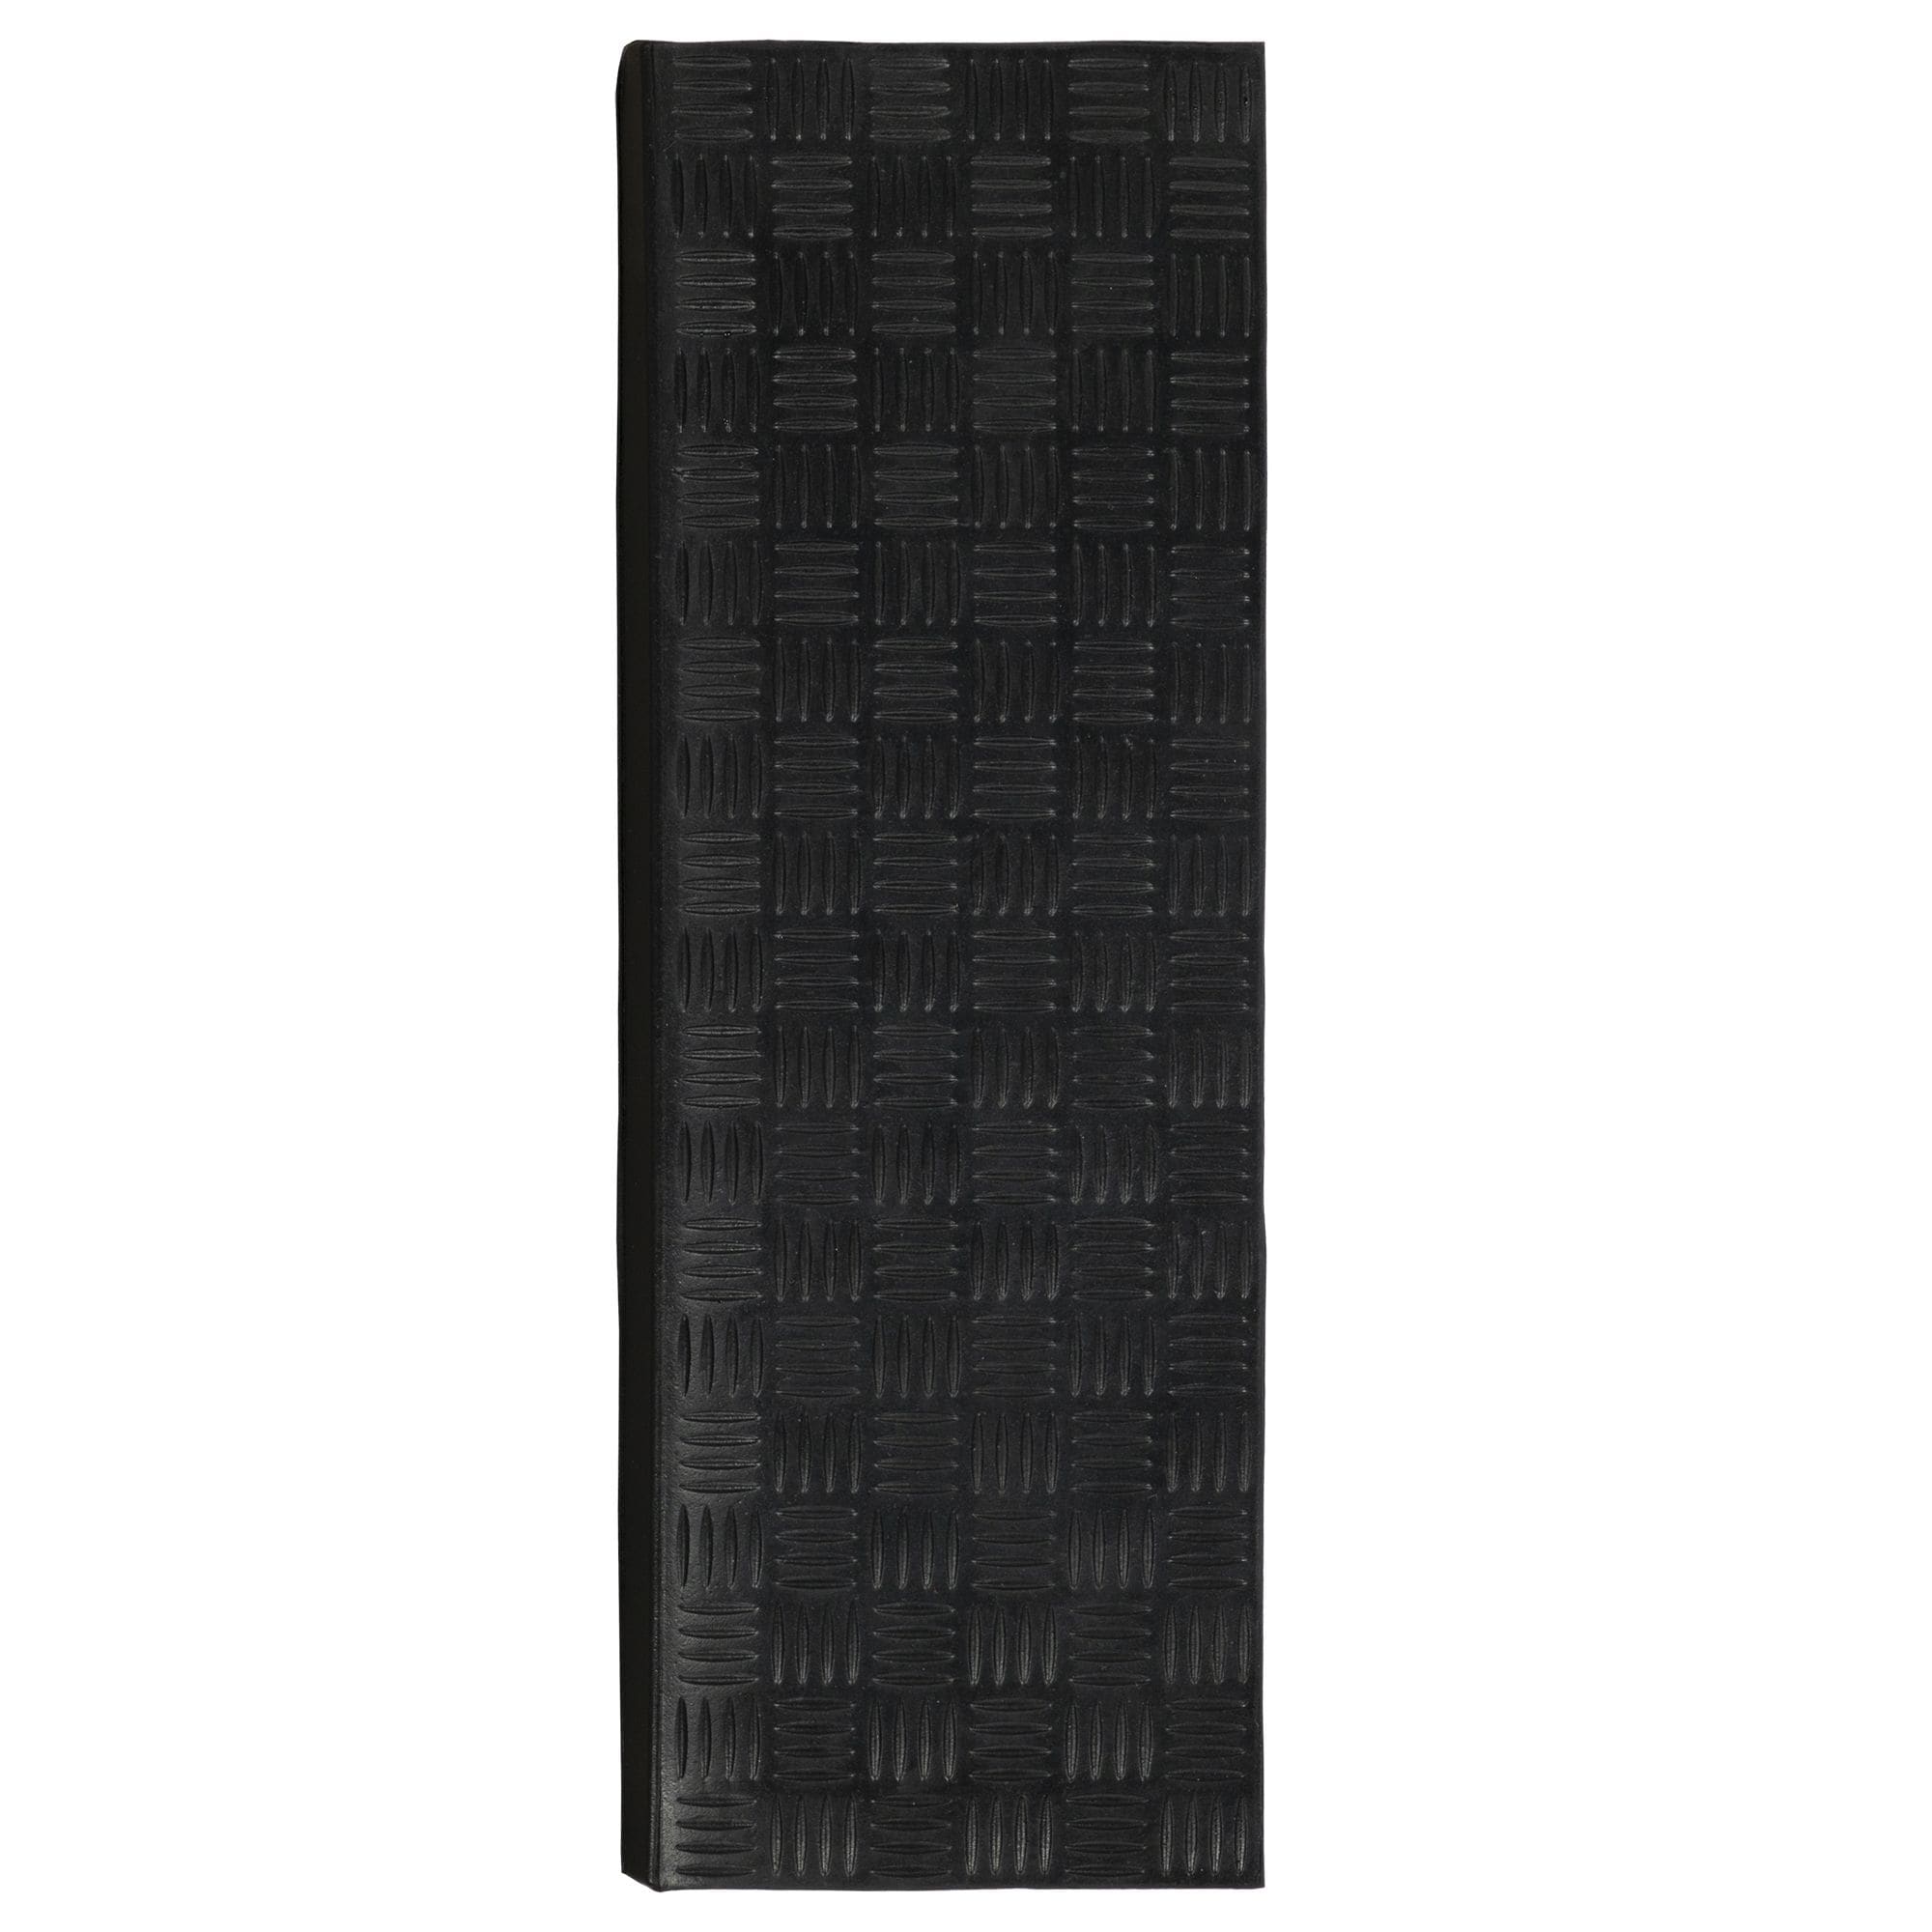 5'X5' Square - Black - Indoor/Outdoor Area Rug Carpet, Runners & Stair  Treads with a Light Weight Latex Backing